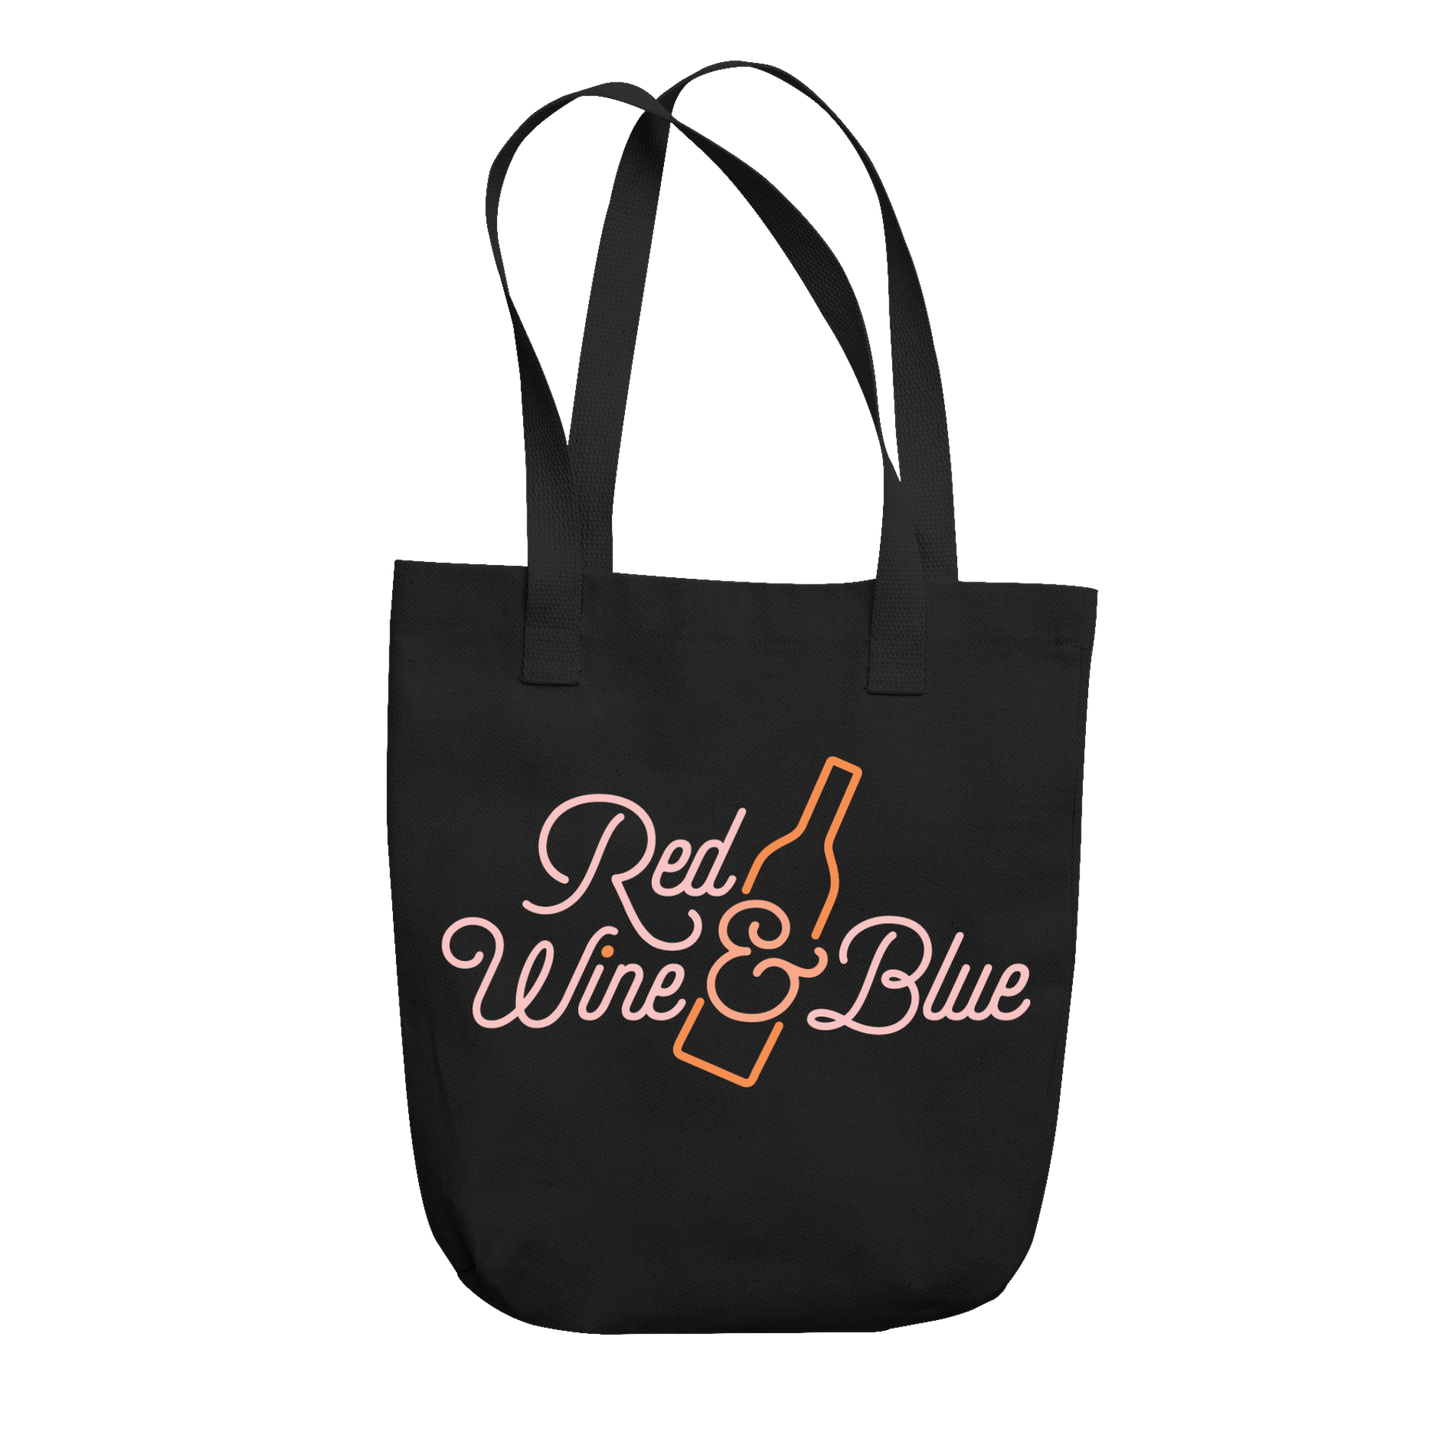 Red Wine and Blue Logo Tote